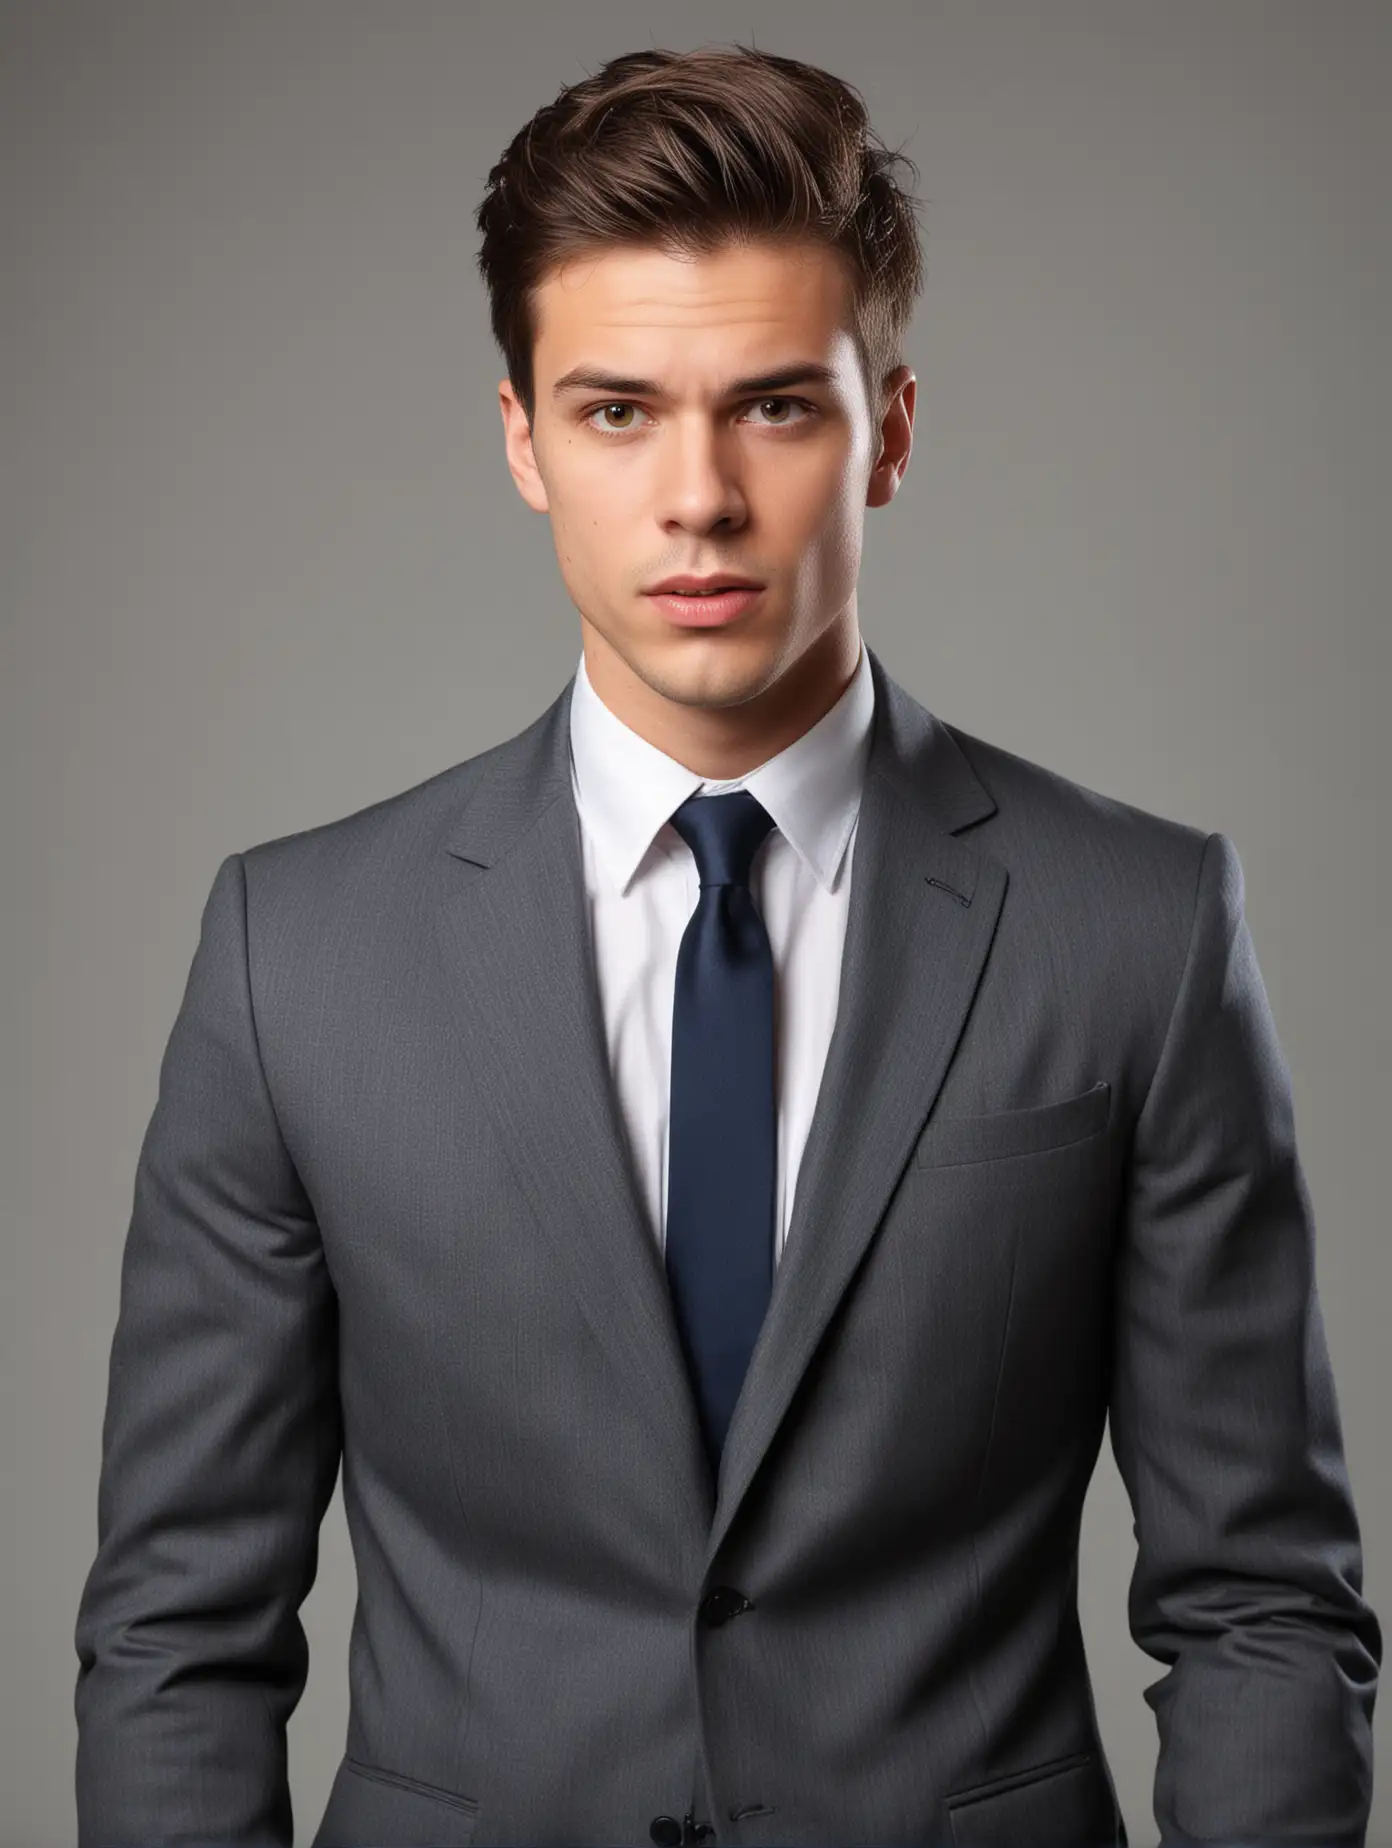 Confident Young Man in Formal Attire Posing with a Curious Gaze on Grey Background